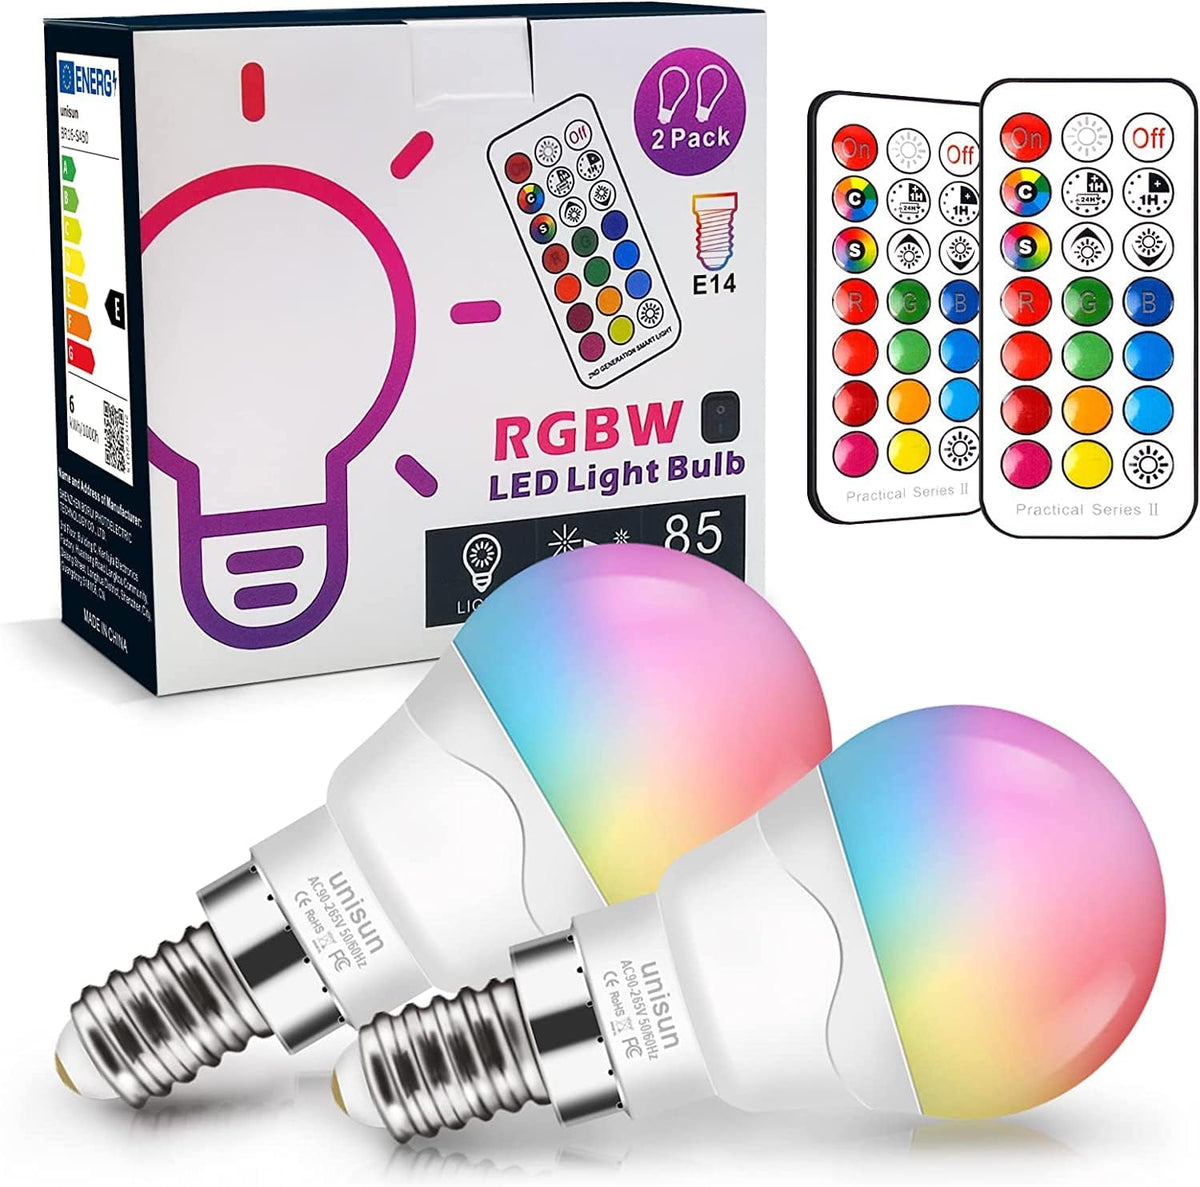 LED E14 Light Bulbs 6W (Equivalent to 40W), RGB Colour Changing Light Bulb Dimmable Edison Screw Coloured Bulb, Night Light Bulb for Home Bar Party KTV Mood Ambiance Lighting [Energy Class E]